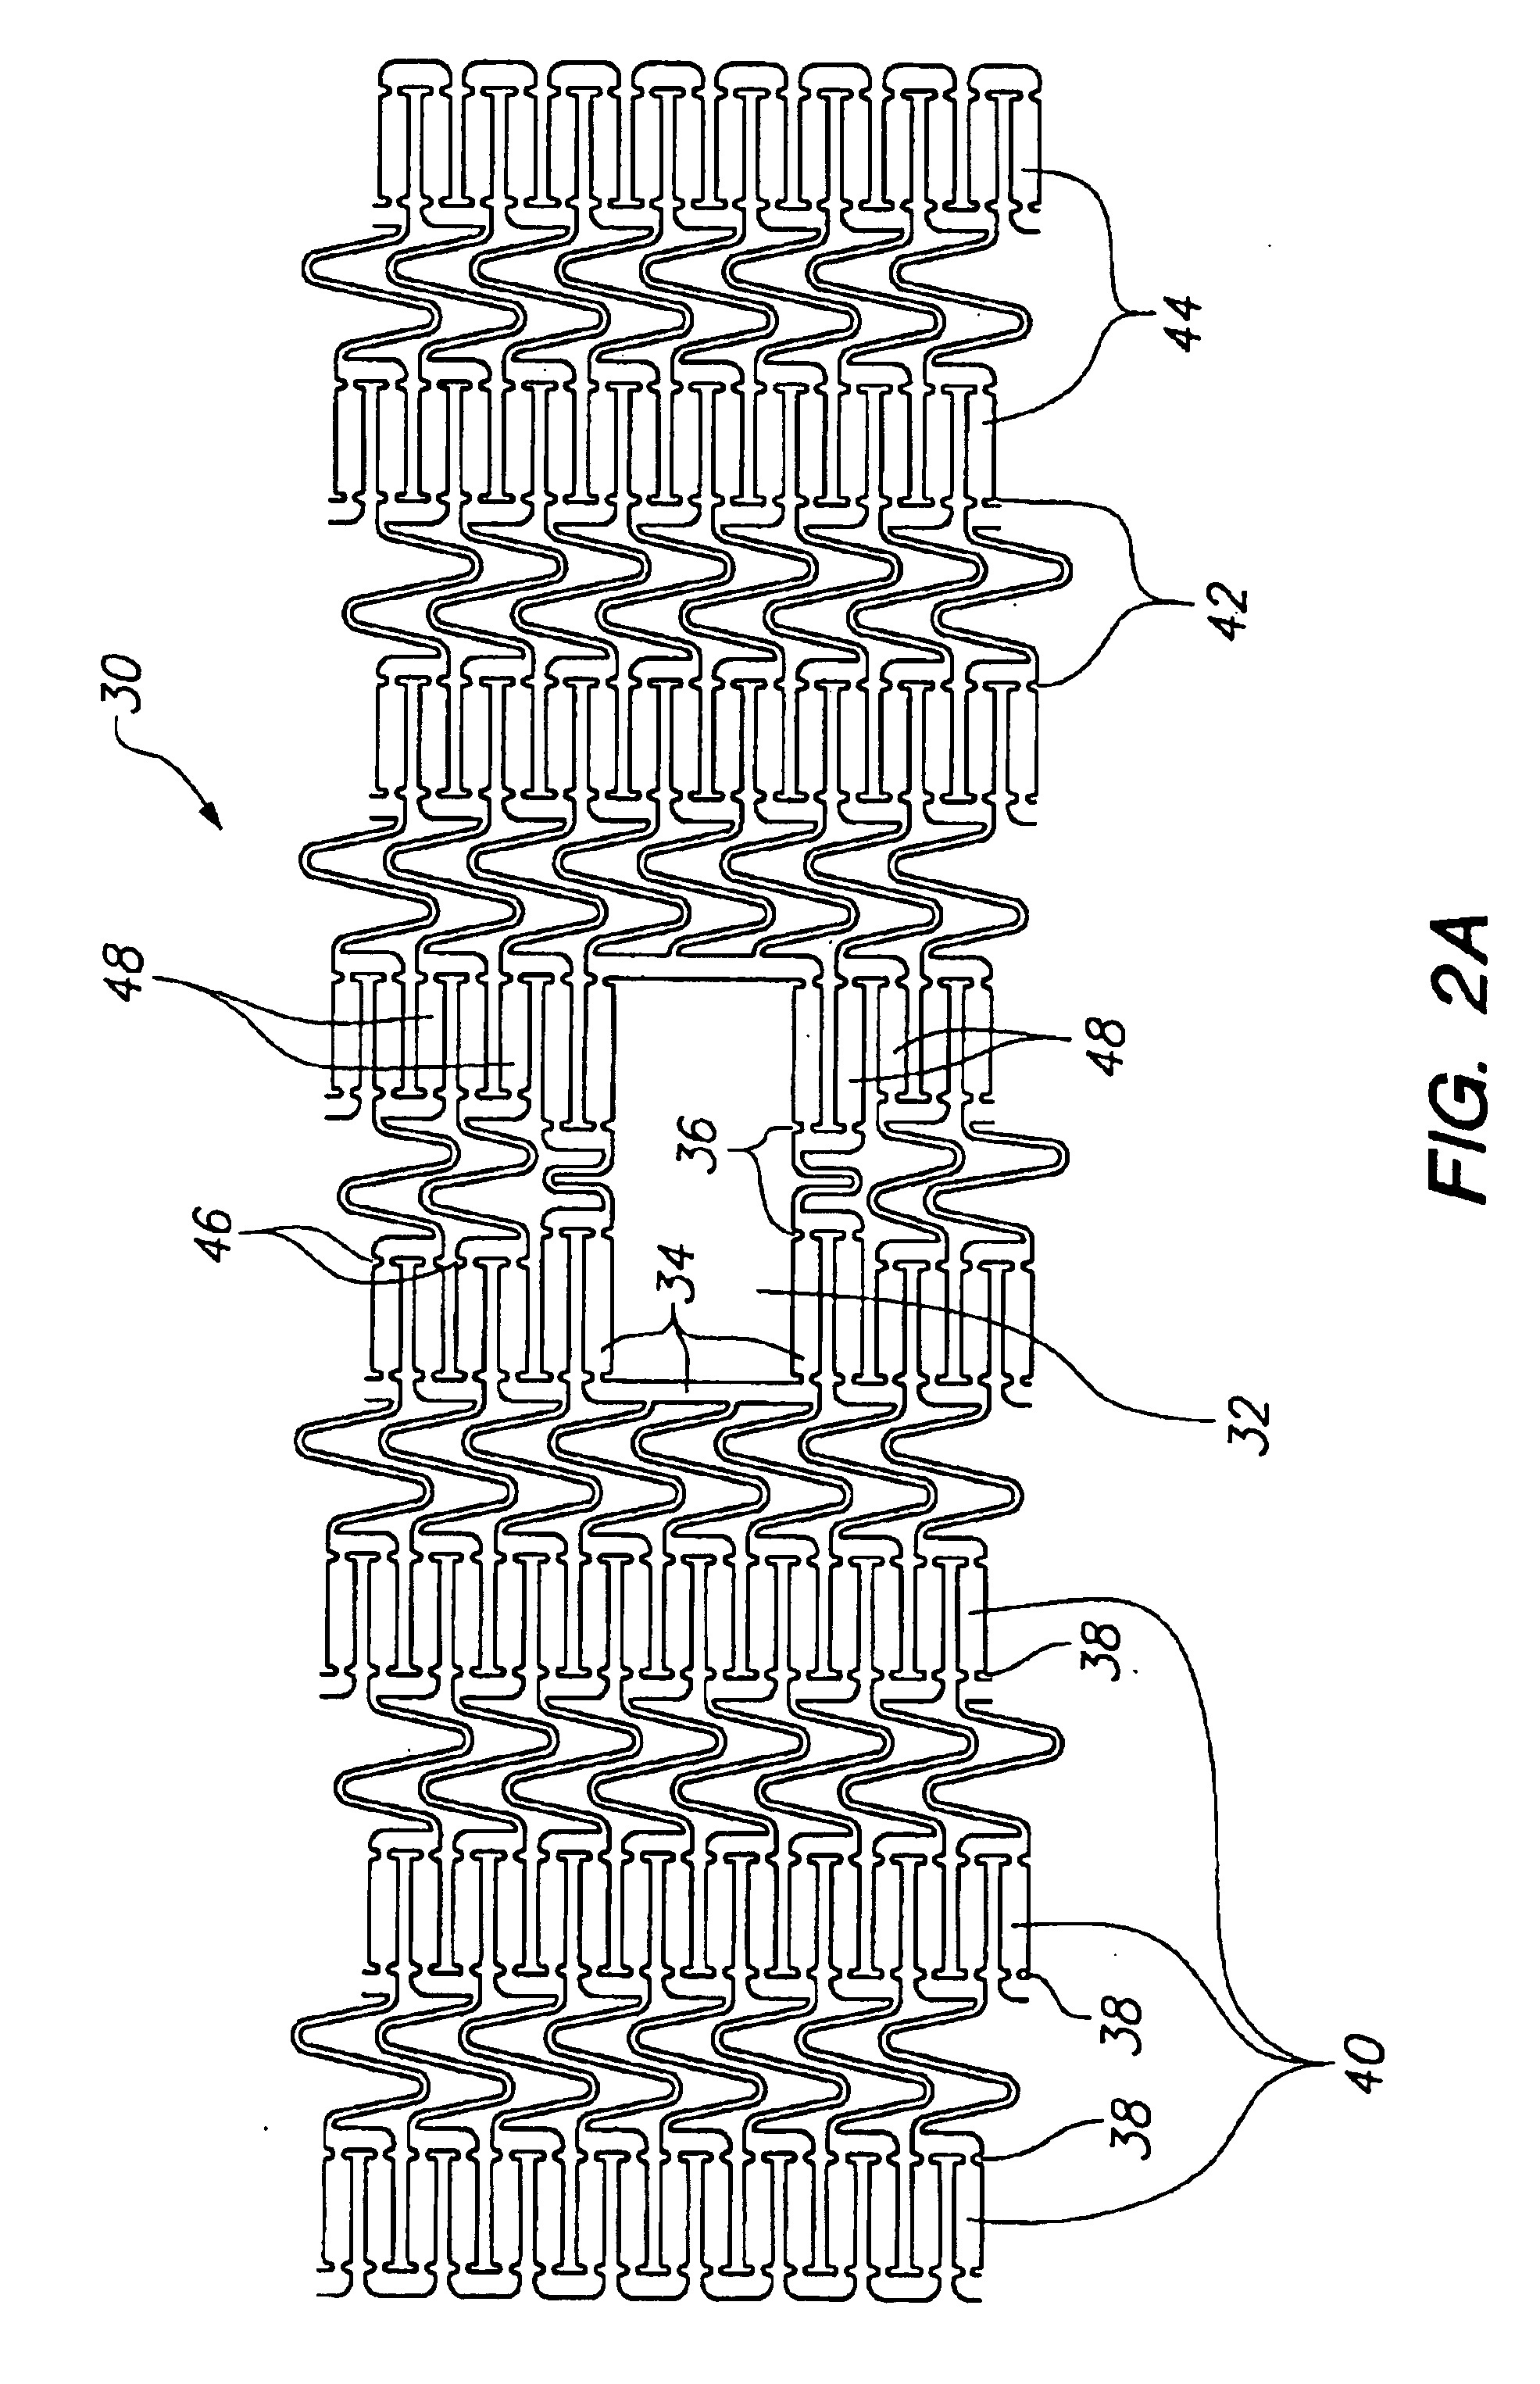 Expandable medical device delivery system and method